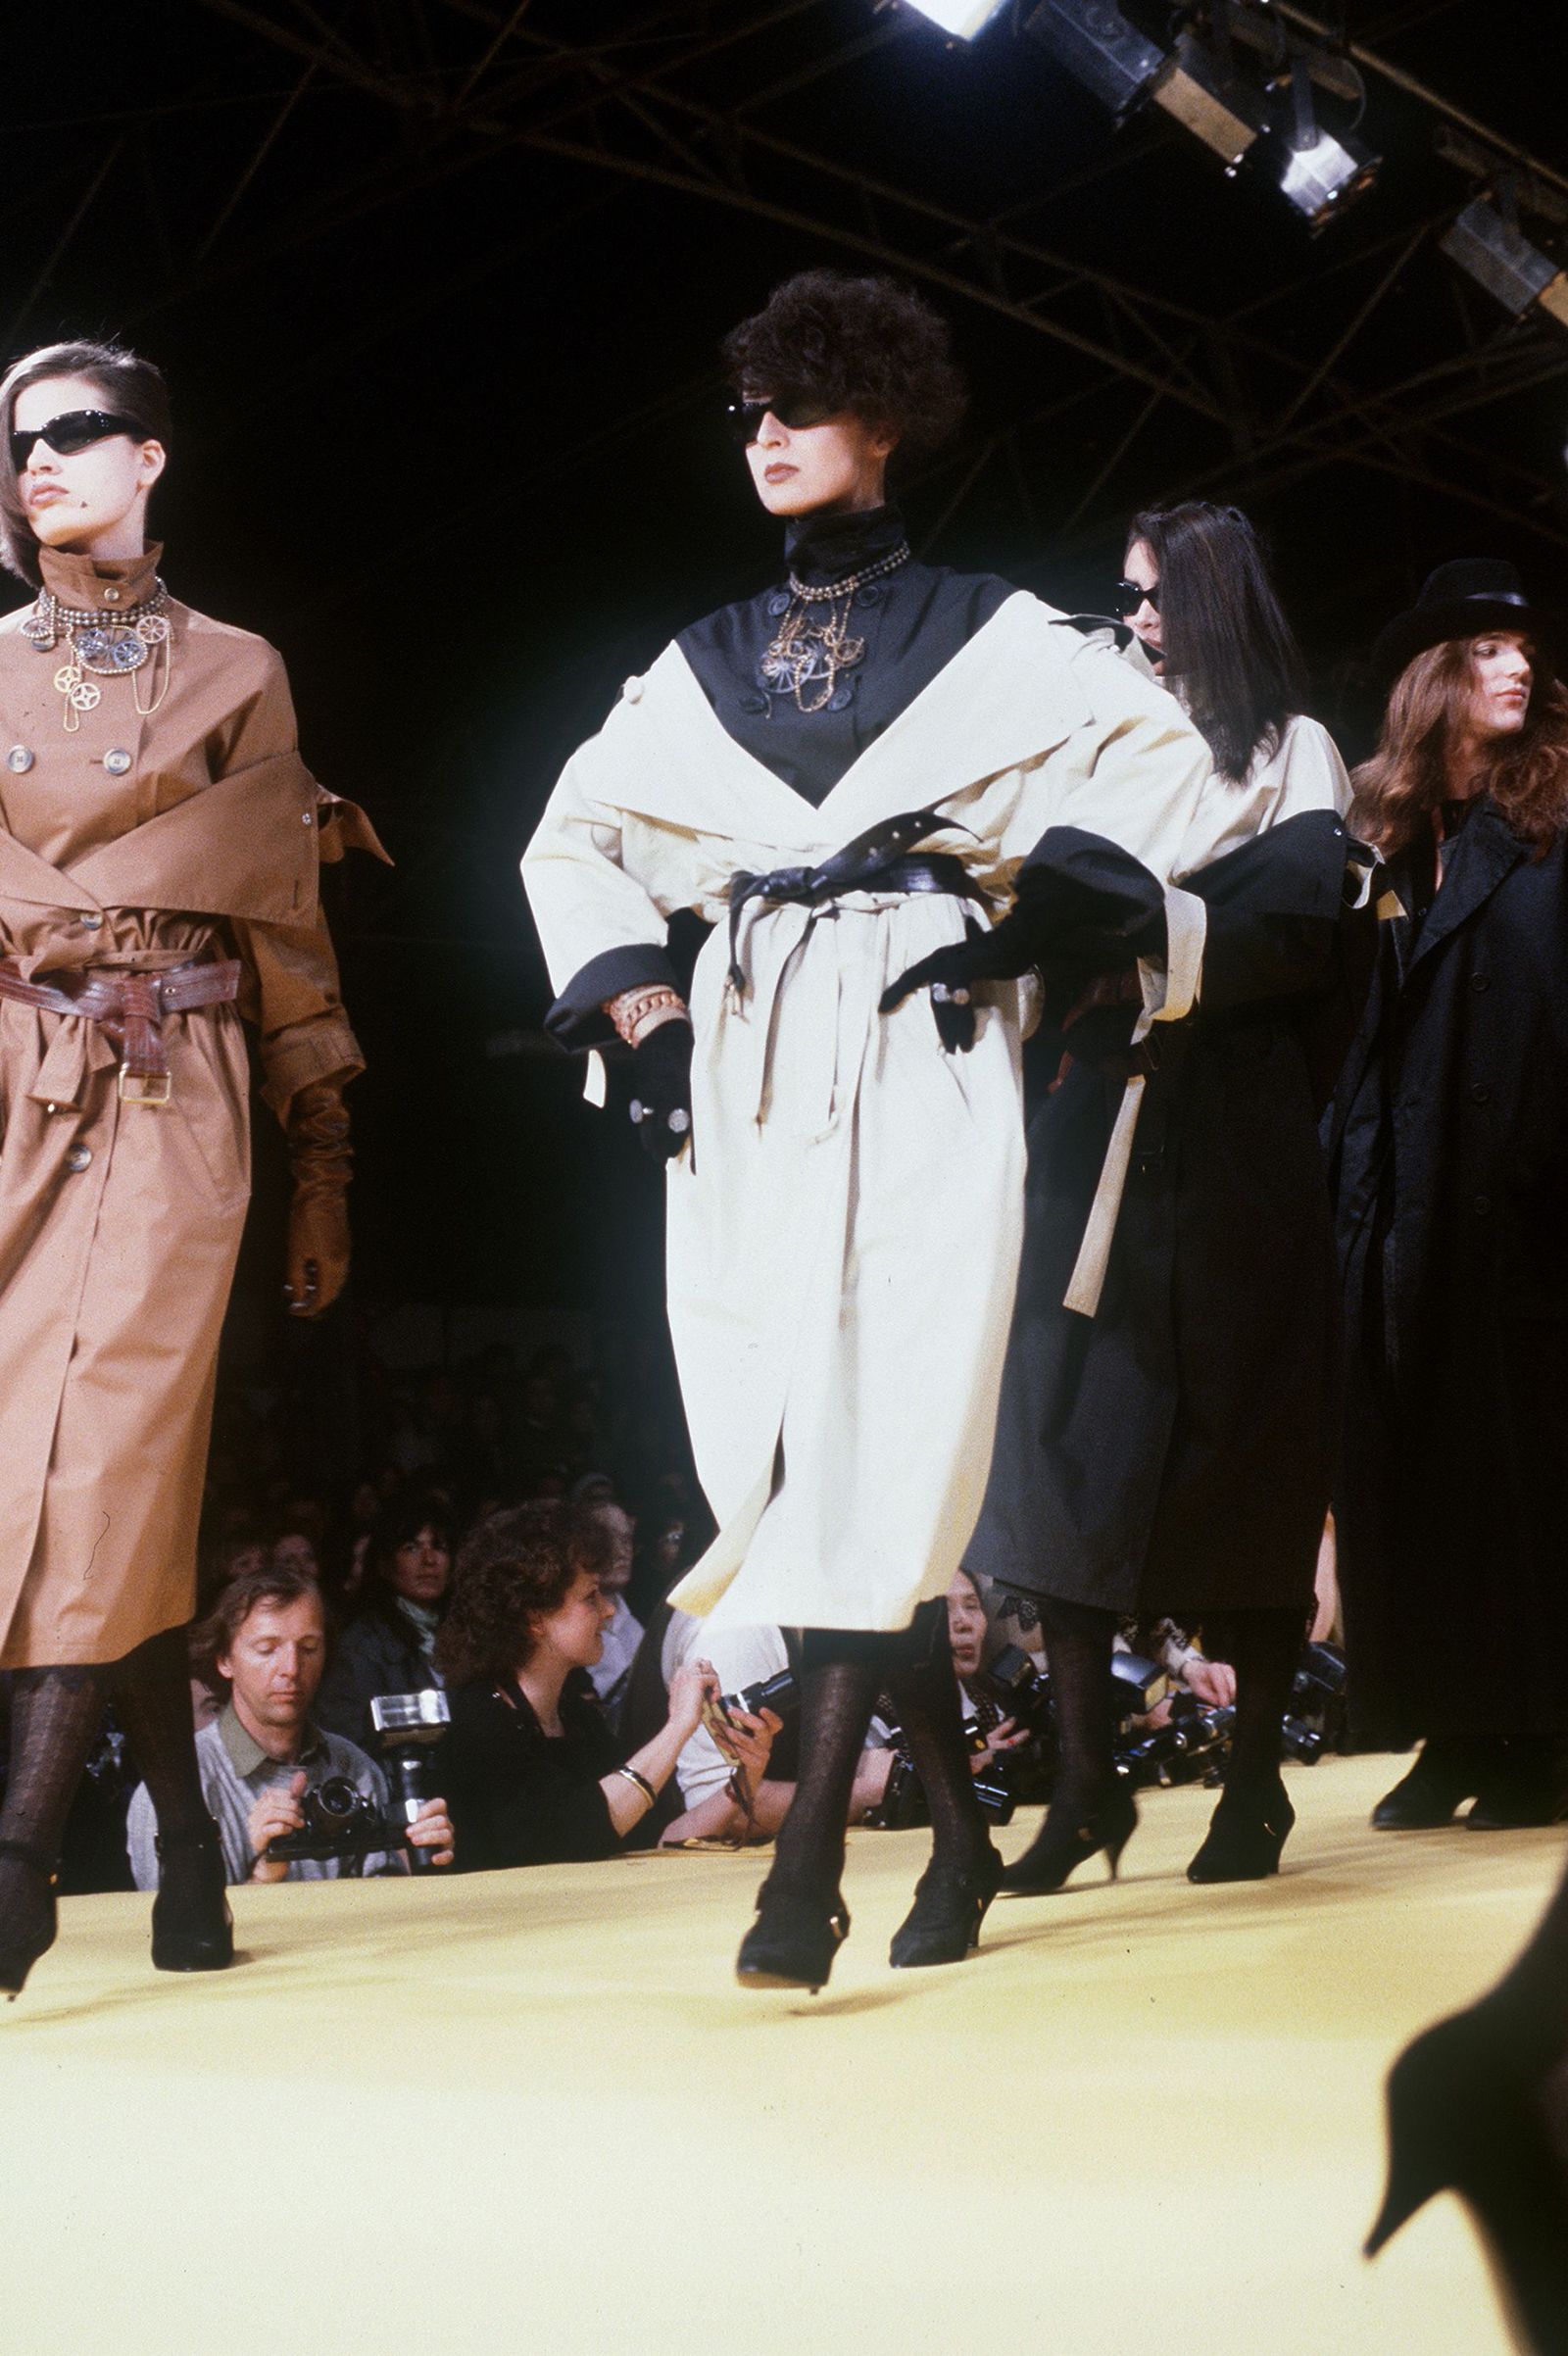 The Complete Guide to '80s Fashion Trends